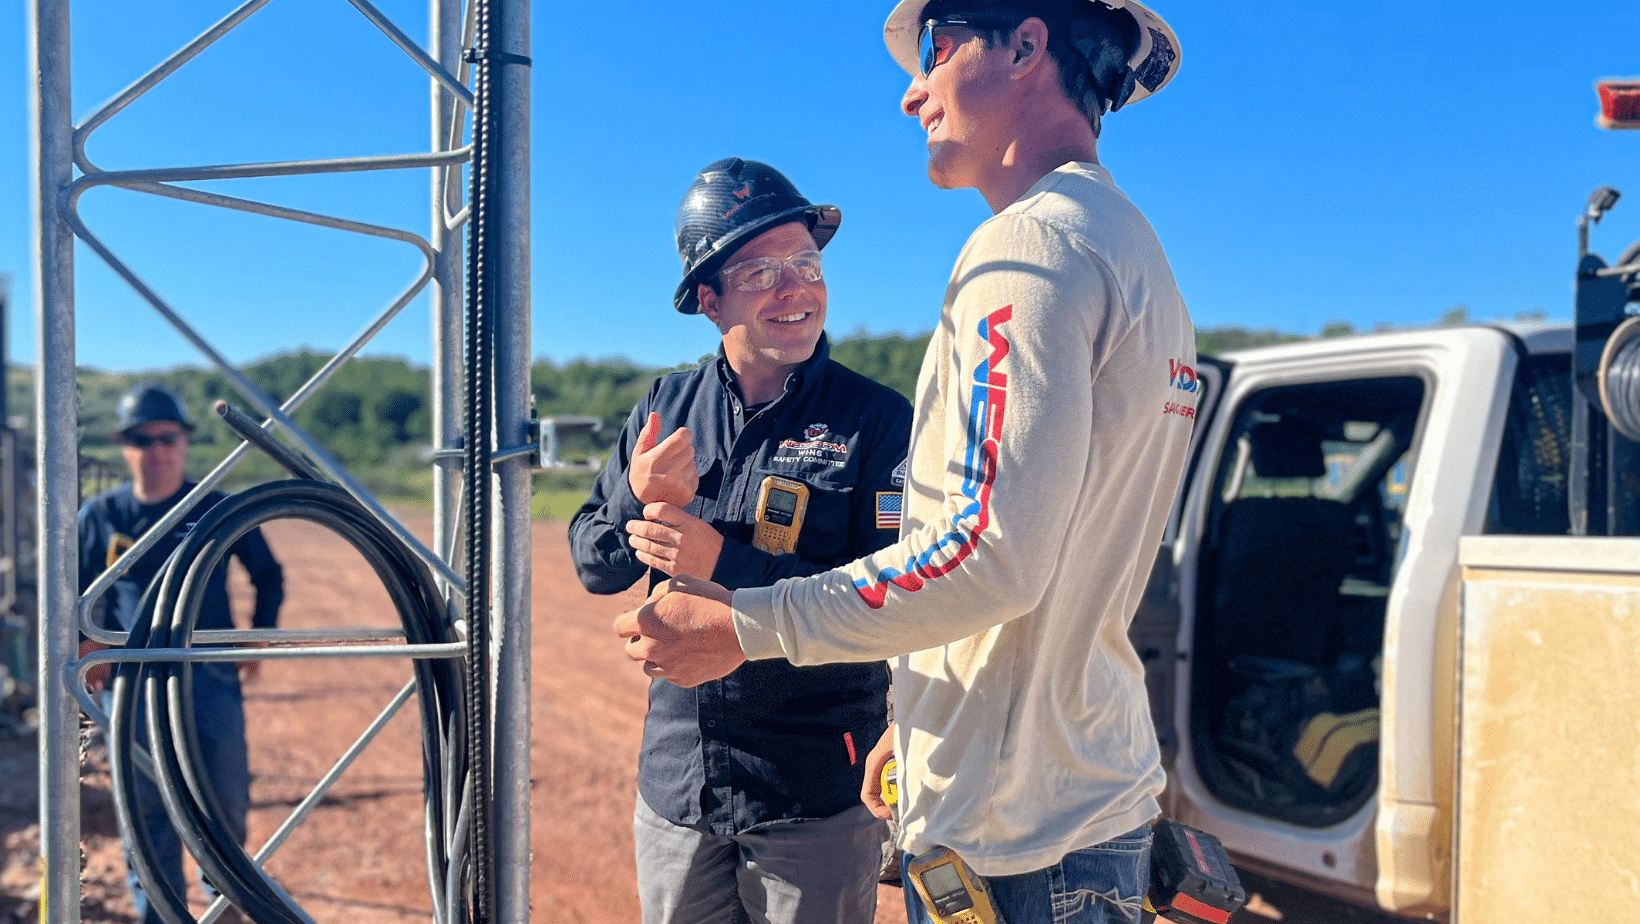 Shane Stolp smiling at a field worker at a job site in the Bakken. Two men wearing wescom apparel smiling outside while working.